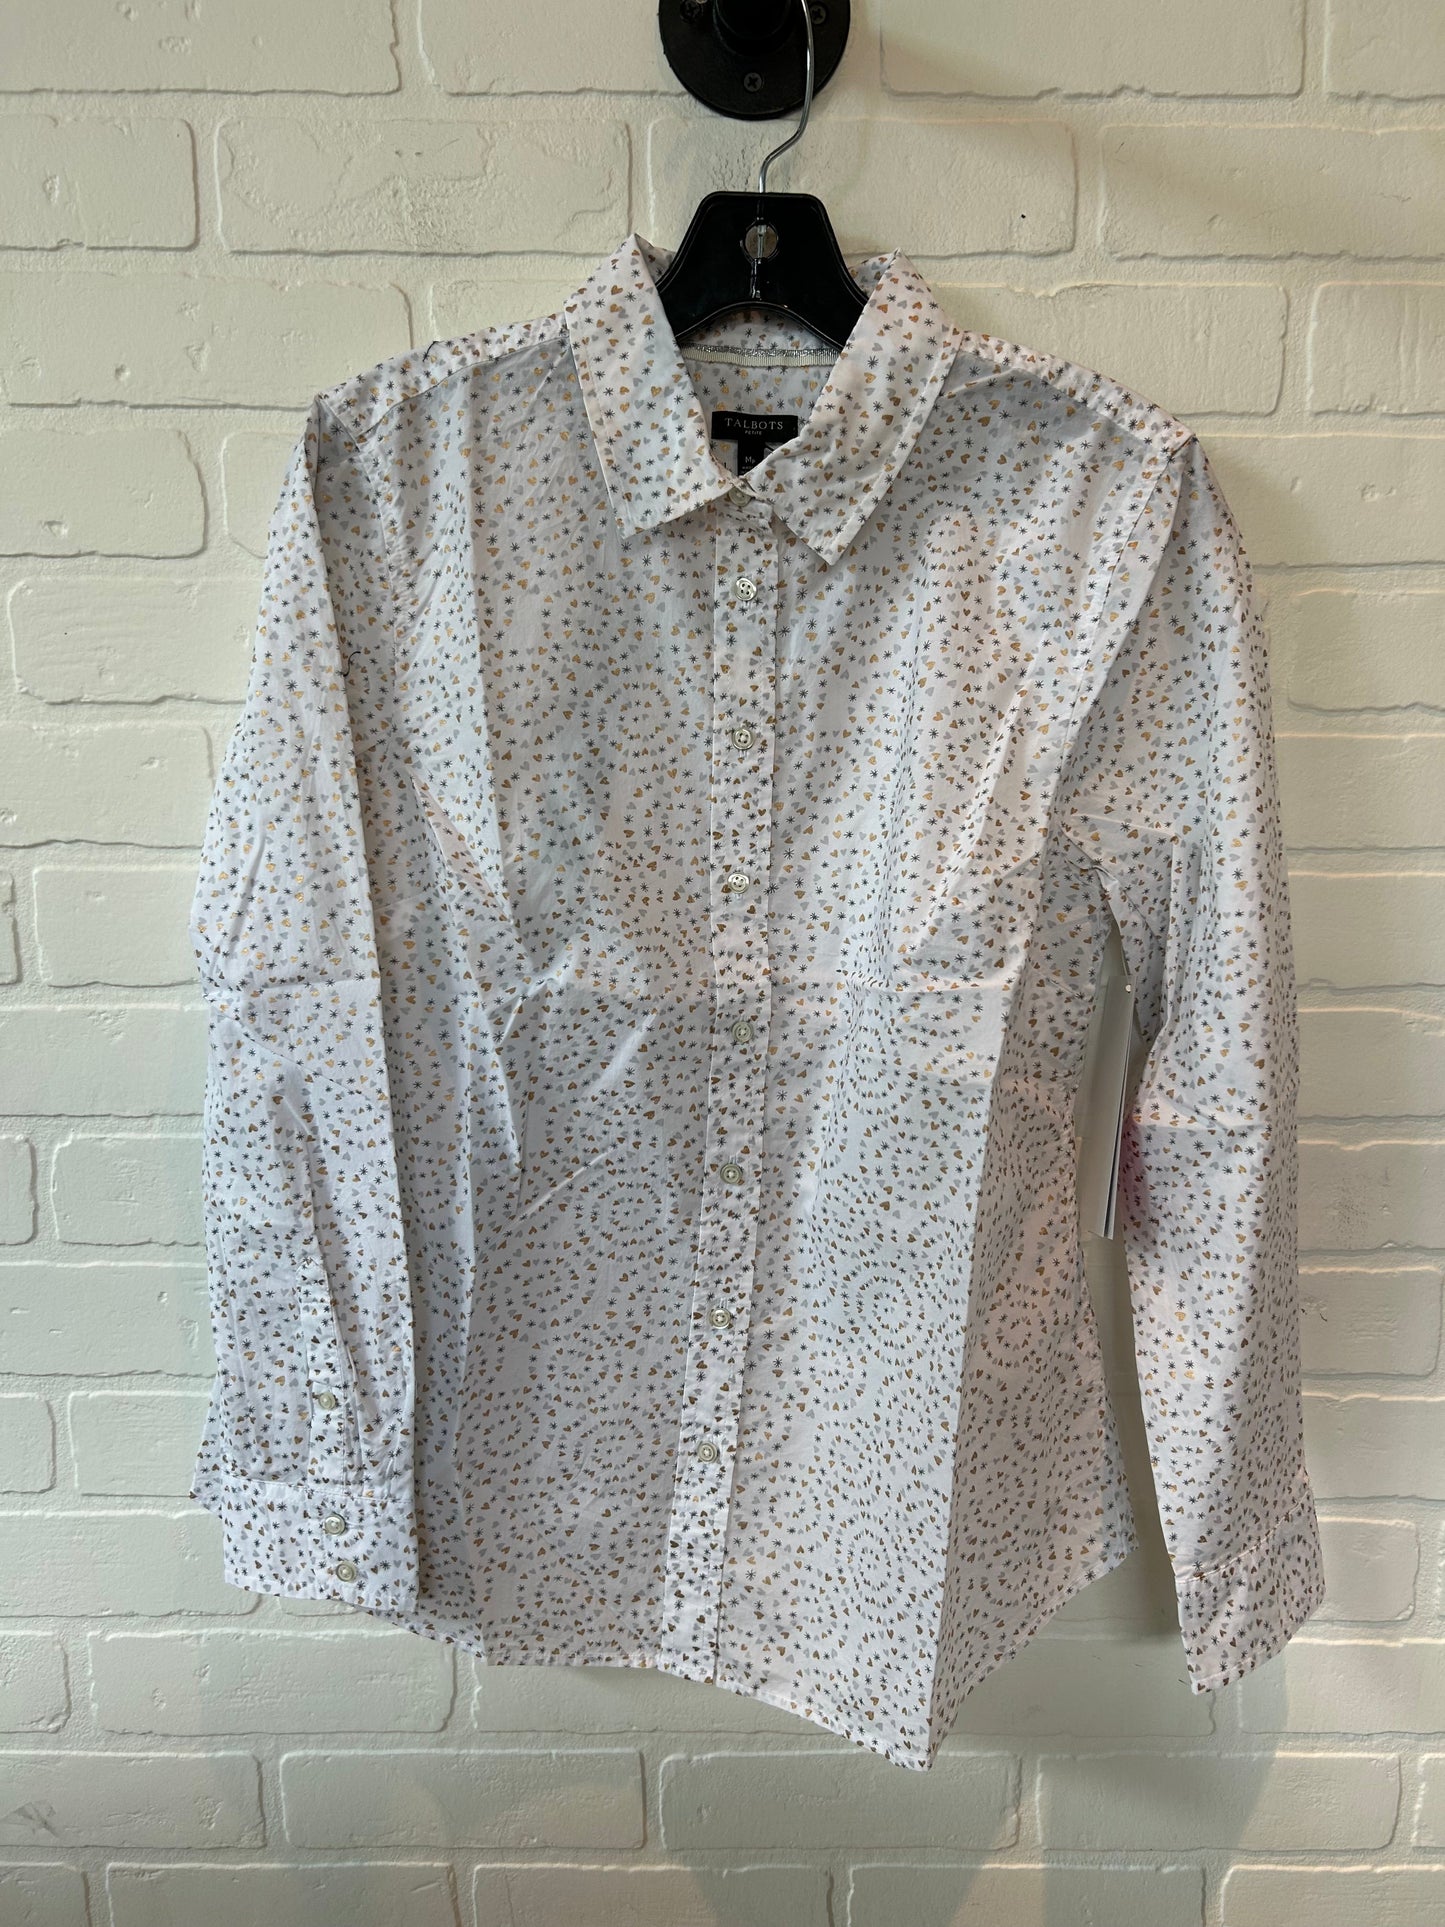 Grey & White Top Long Sleeve Talbots, Size M